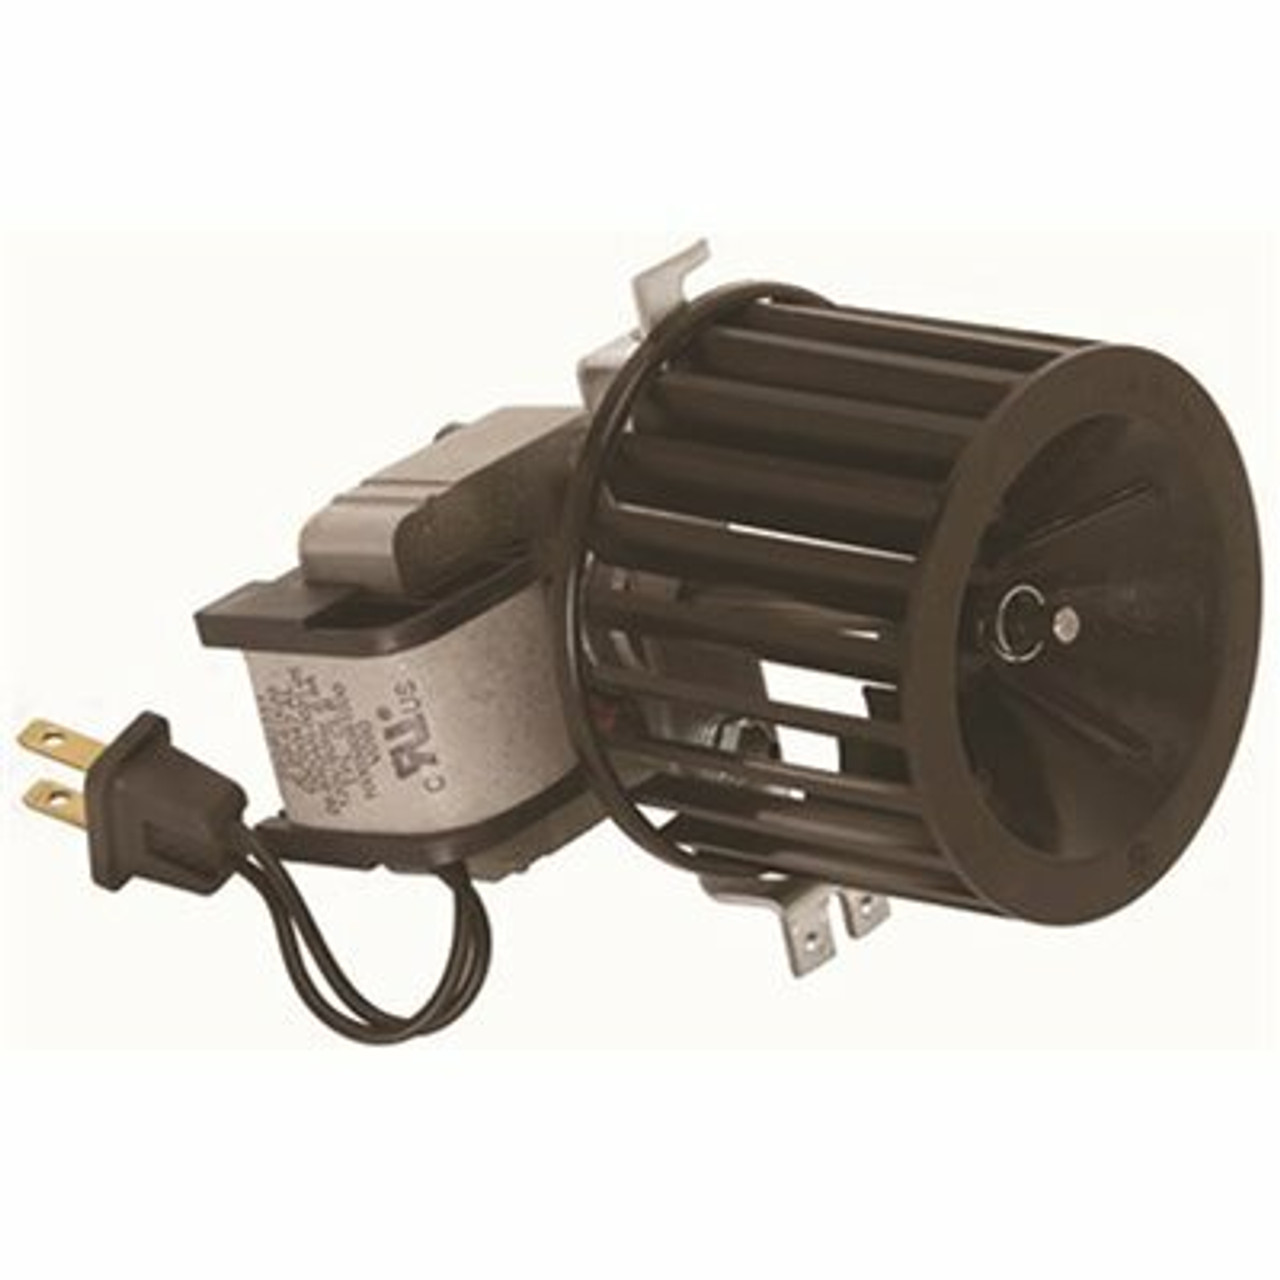 Broan-Nutone Blower Assembly Cw - Includes Motor, Blower Wheel And Mounting Bracket